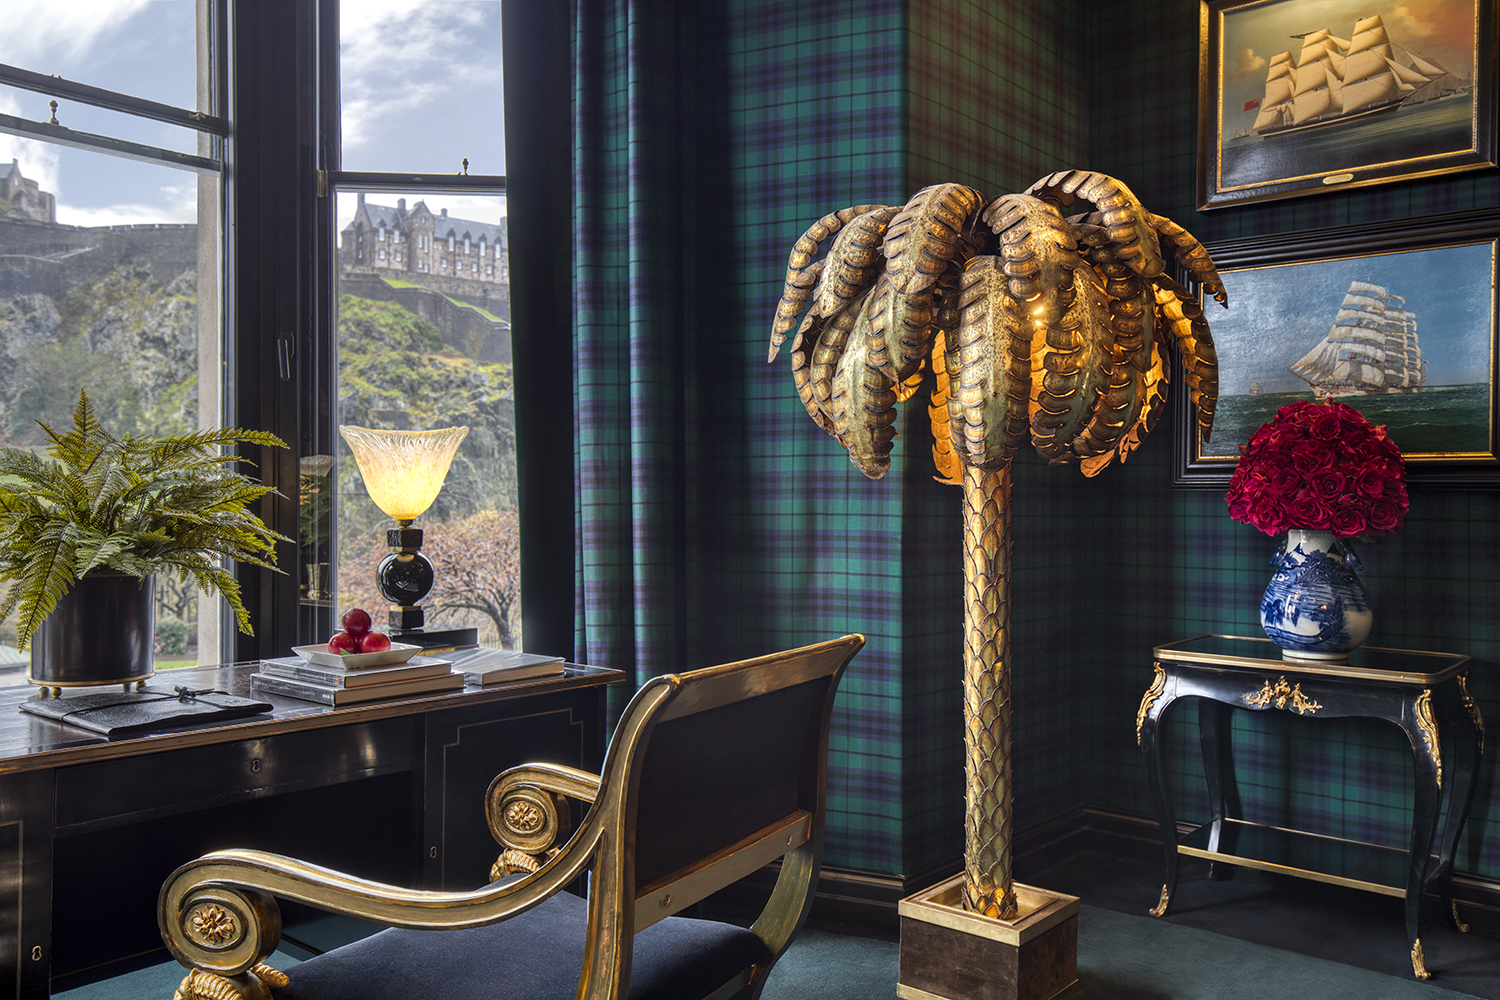 While many of the decorative elements at 100 Princes Street in Edinburgh nod to nautical motifs, other elements capture director of design Toni Tollman's love of whimsical accents.